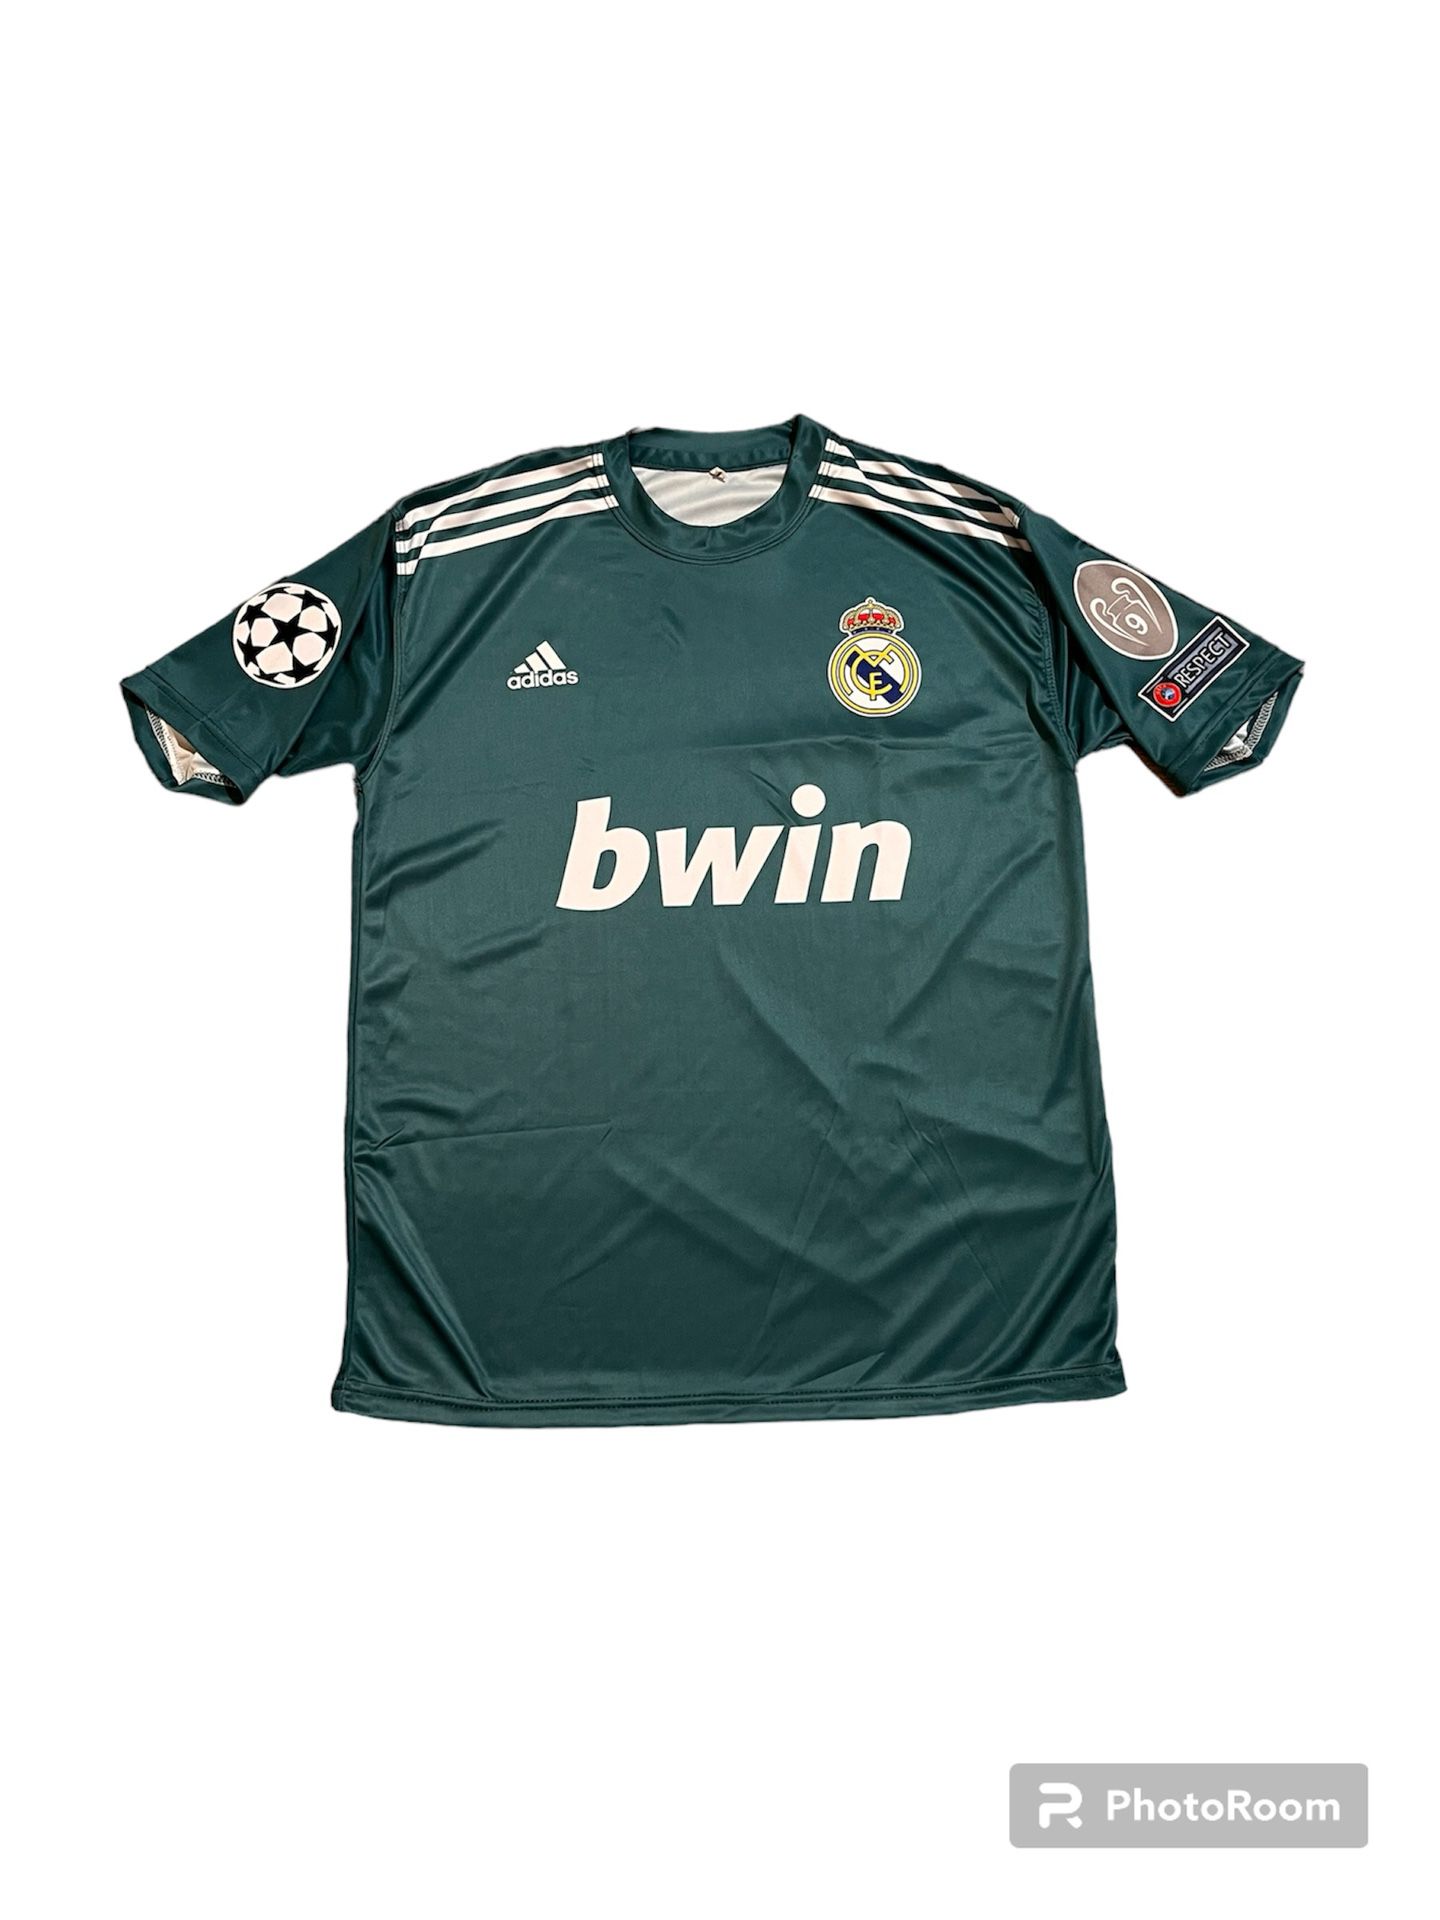 Adidas Real Madrid 2012/2013 Third Kit Green Retro Soccer Jersey with patches